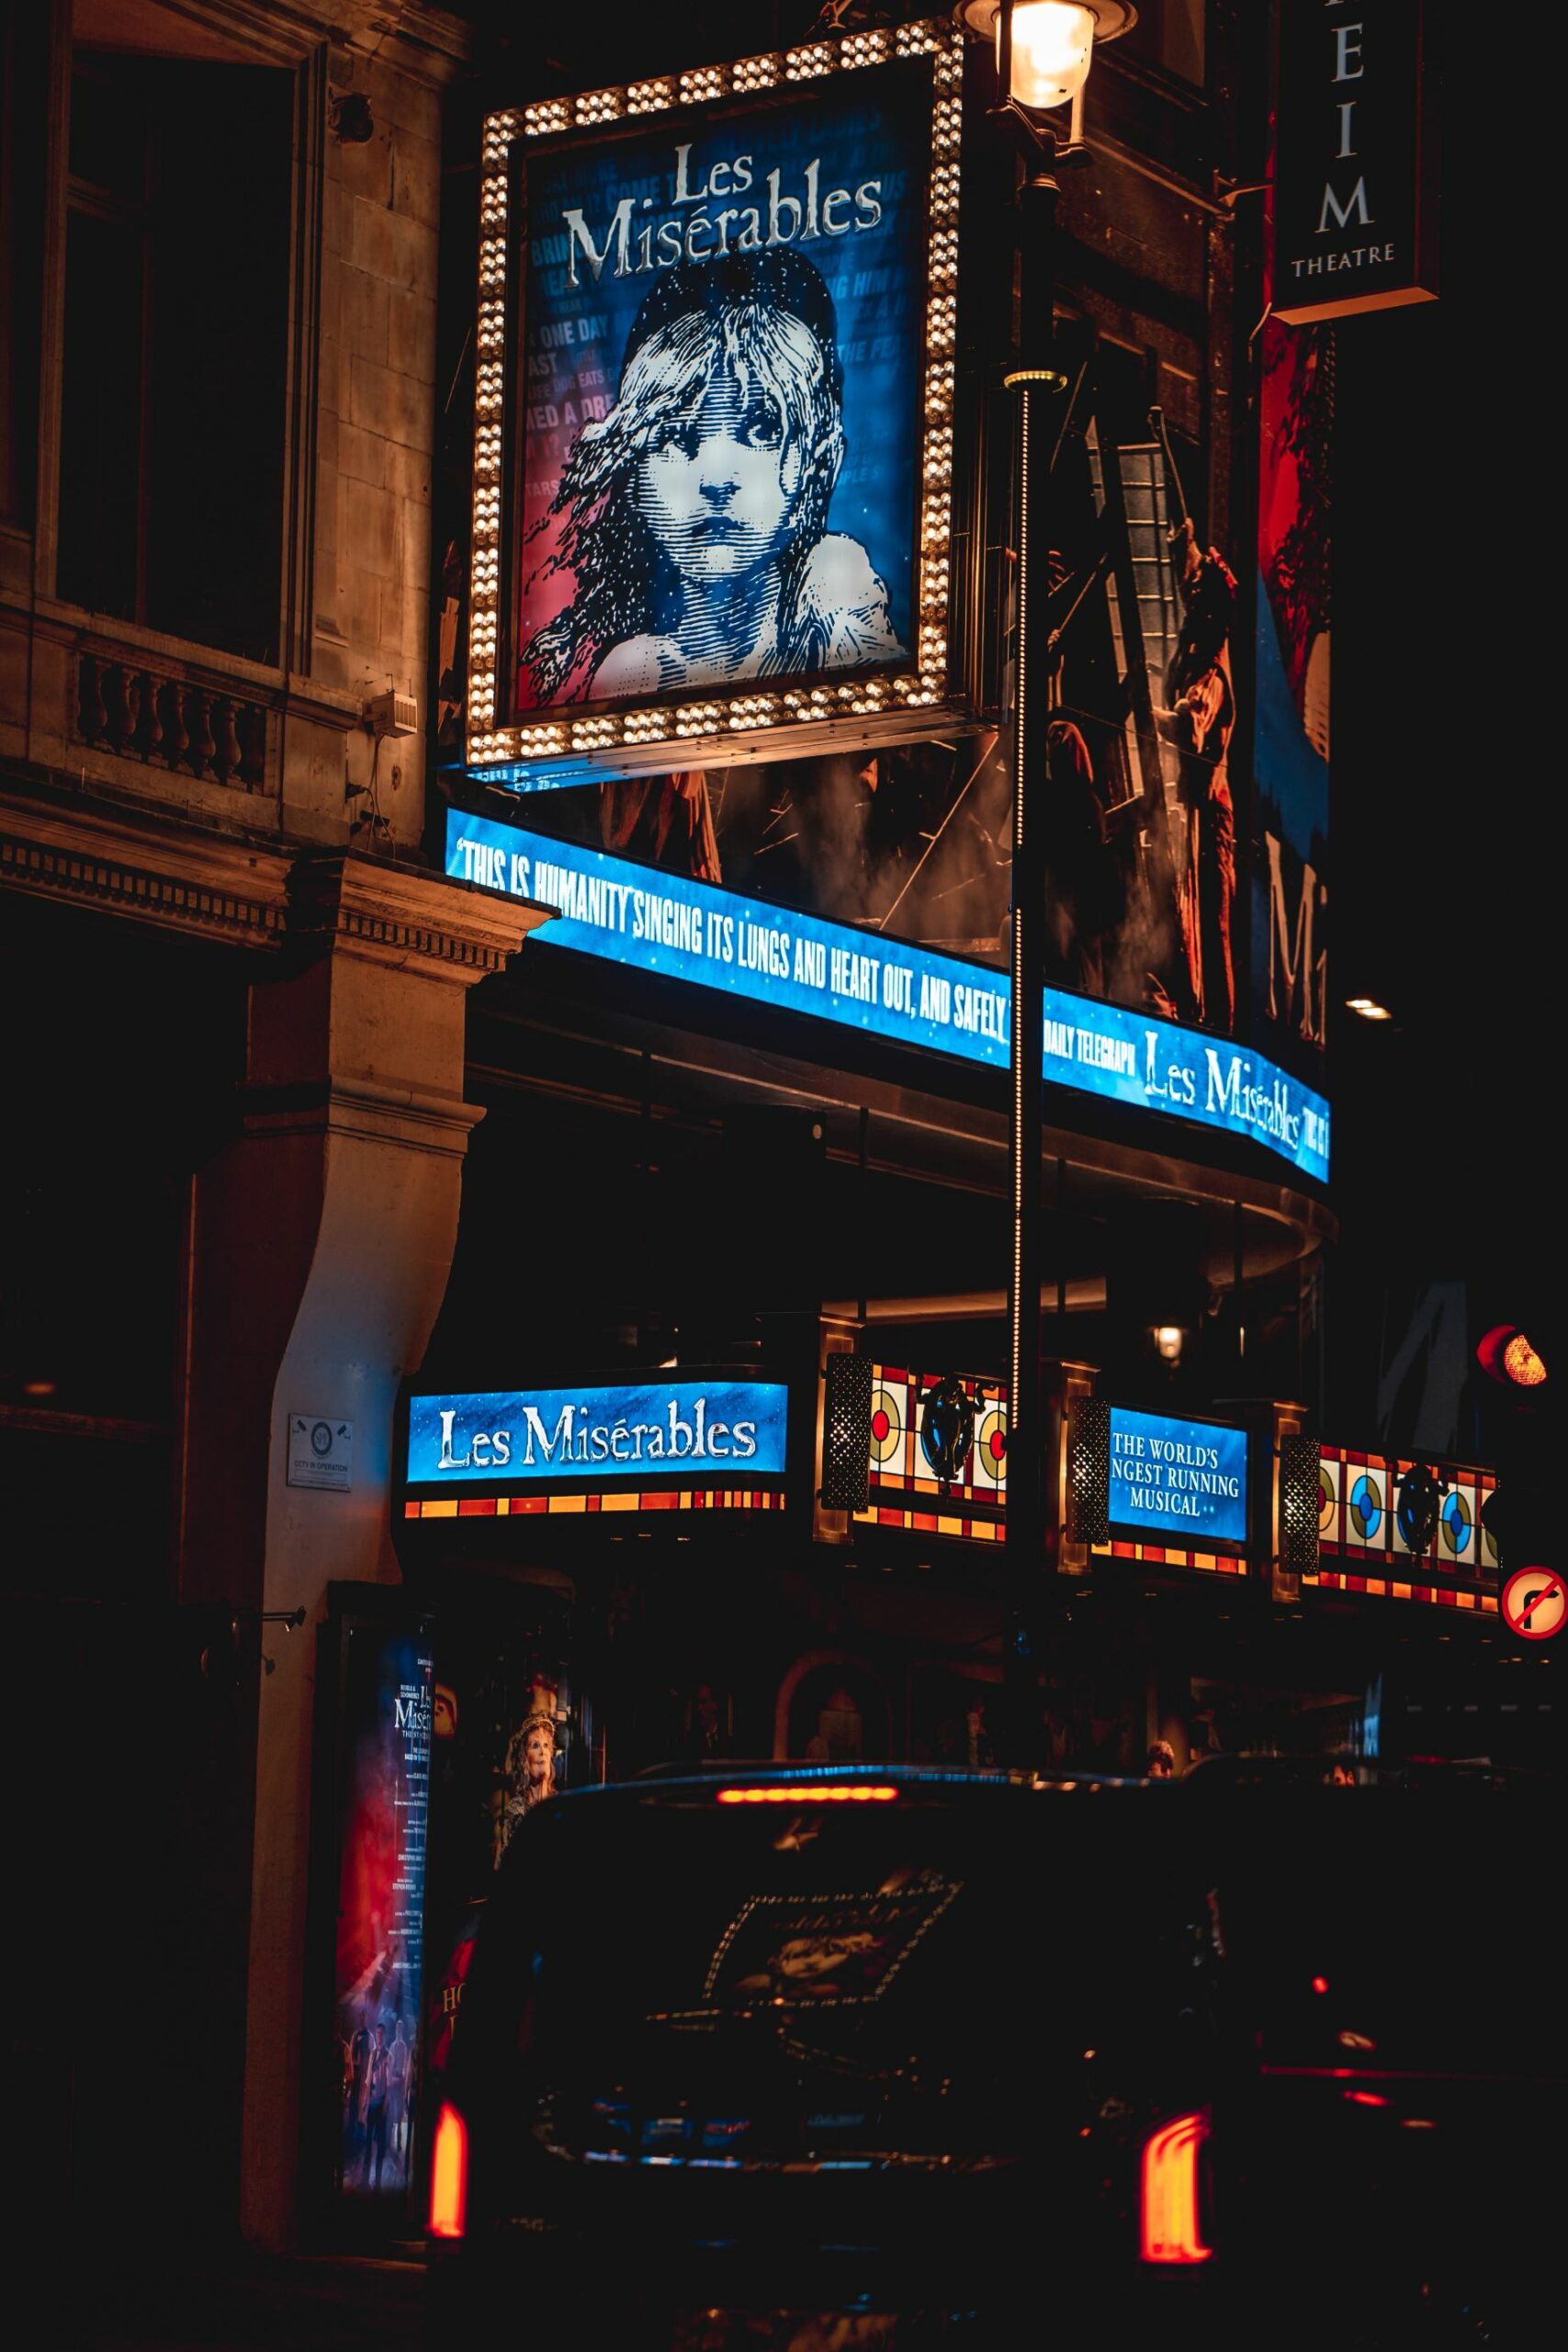 An image of the sign for Les Miserables.